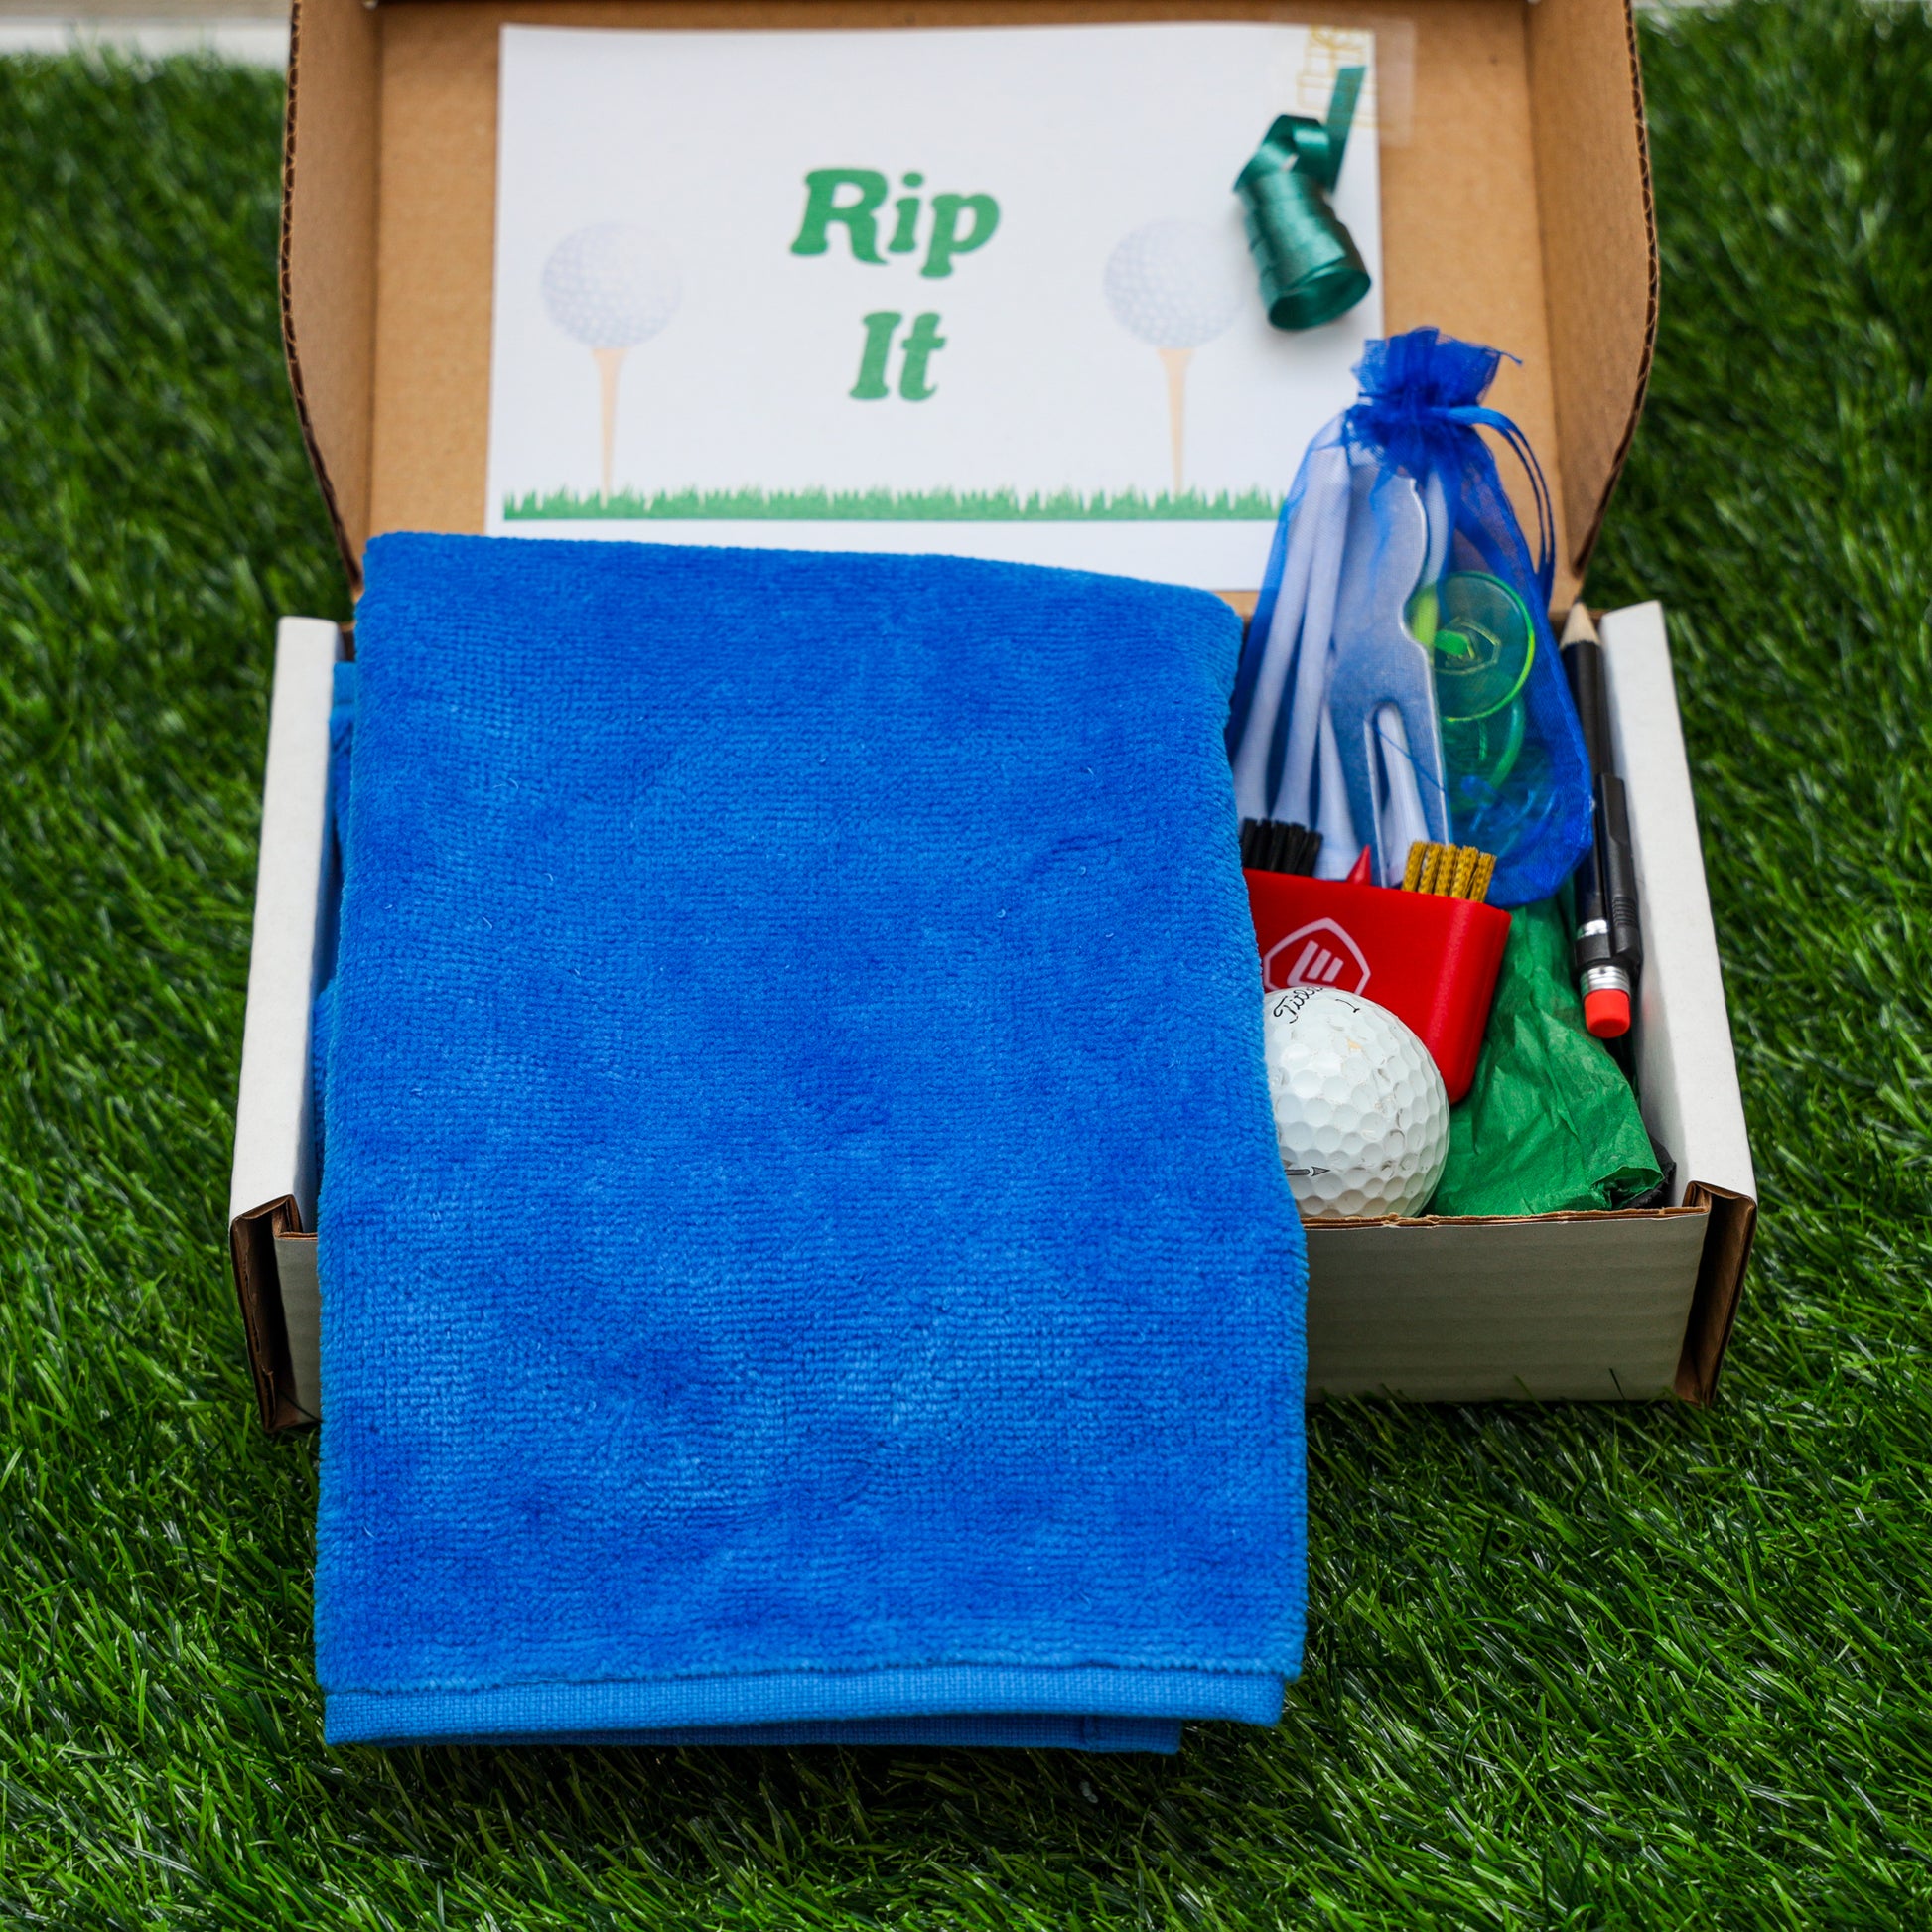 Personalised Tri Fold Golf Towel with Name Golfing Gift Box  - Always Looking Good - Royal Blue Towel  